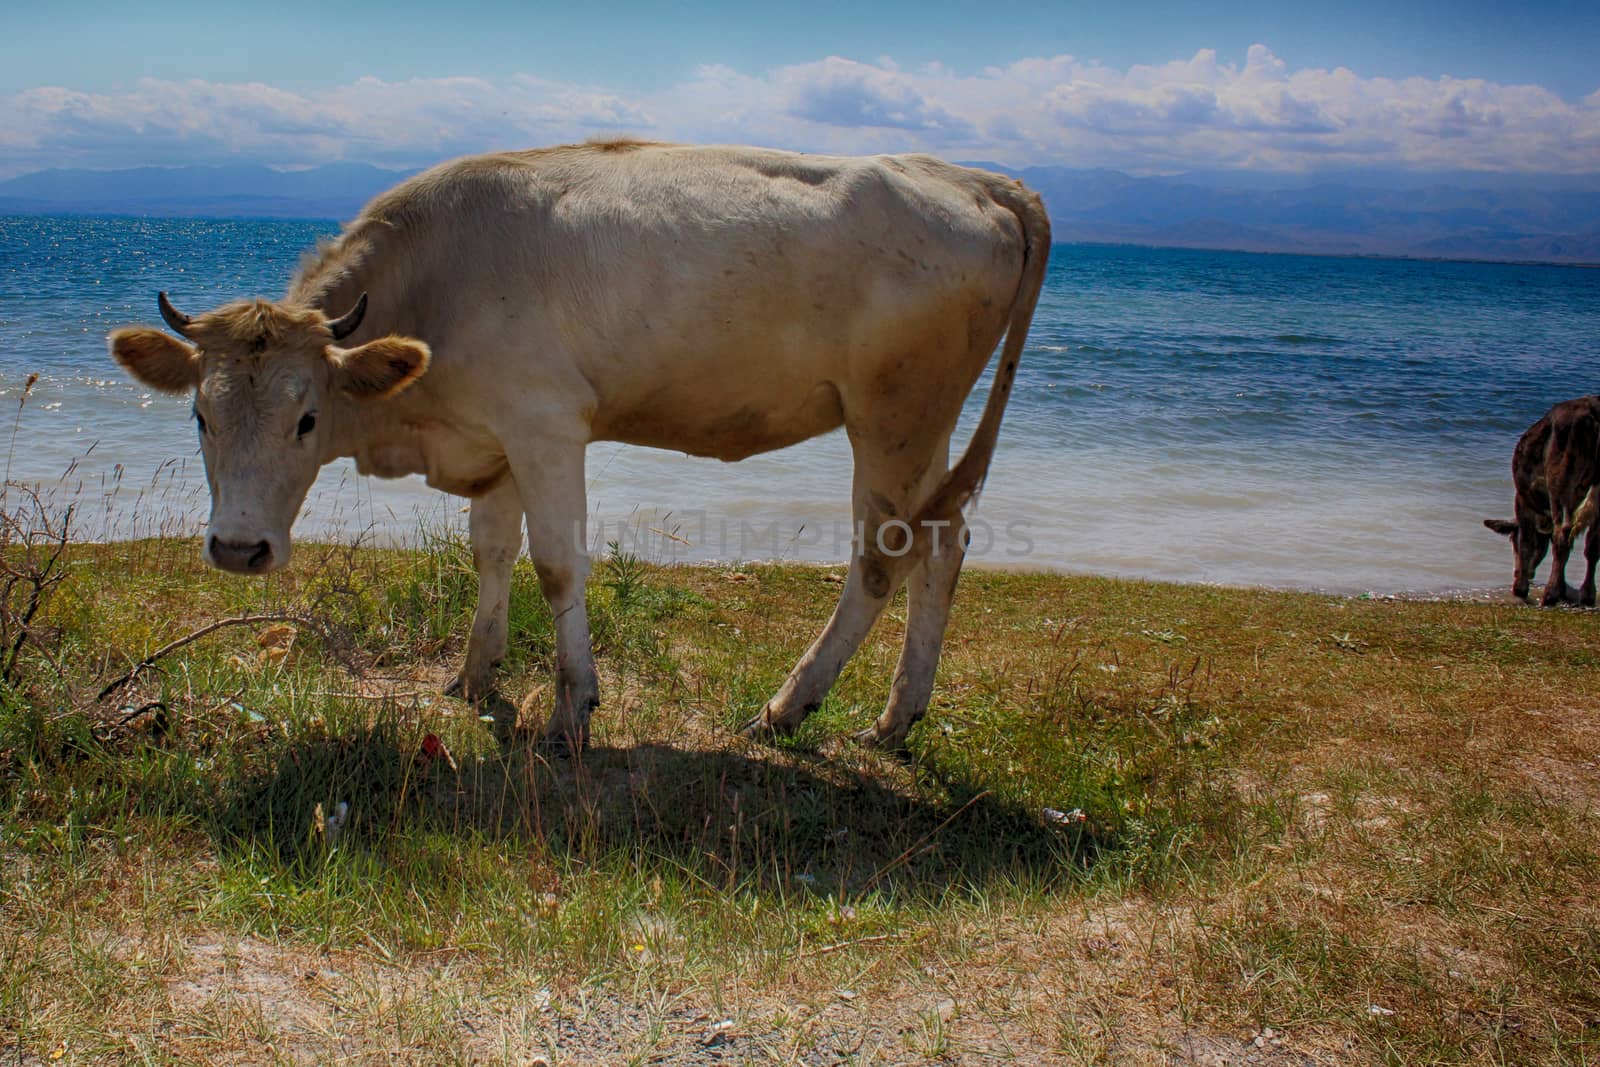 Cow and lake. by nurjan100